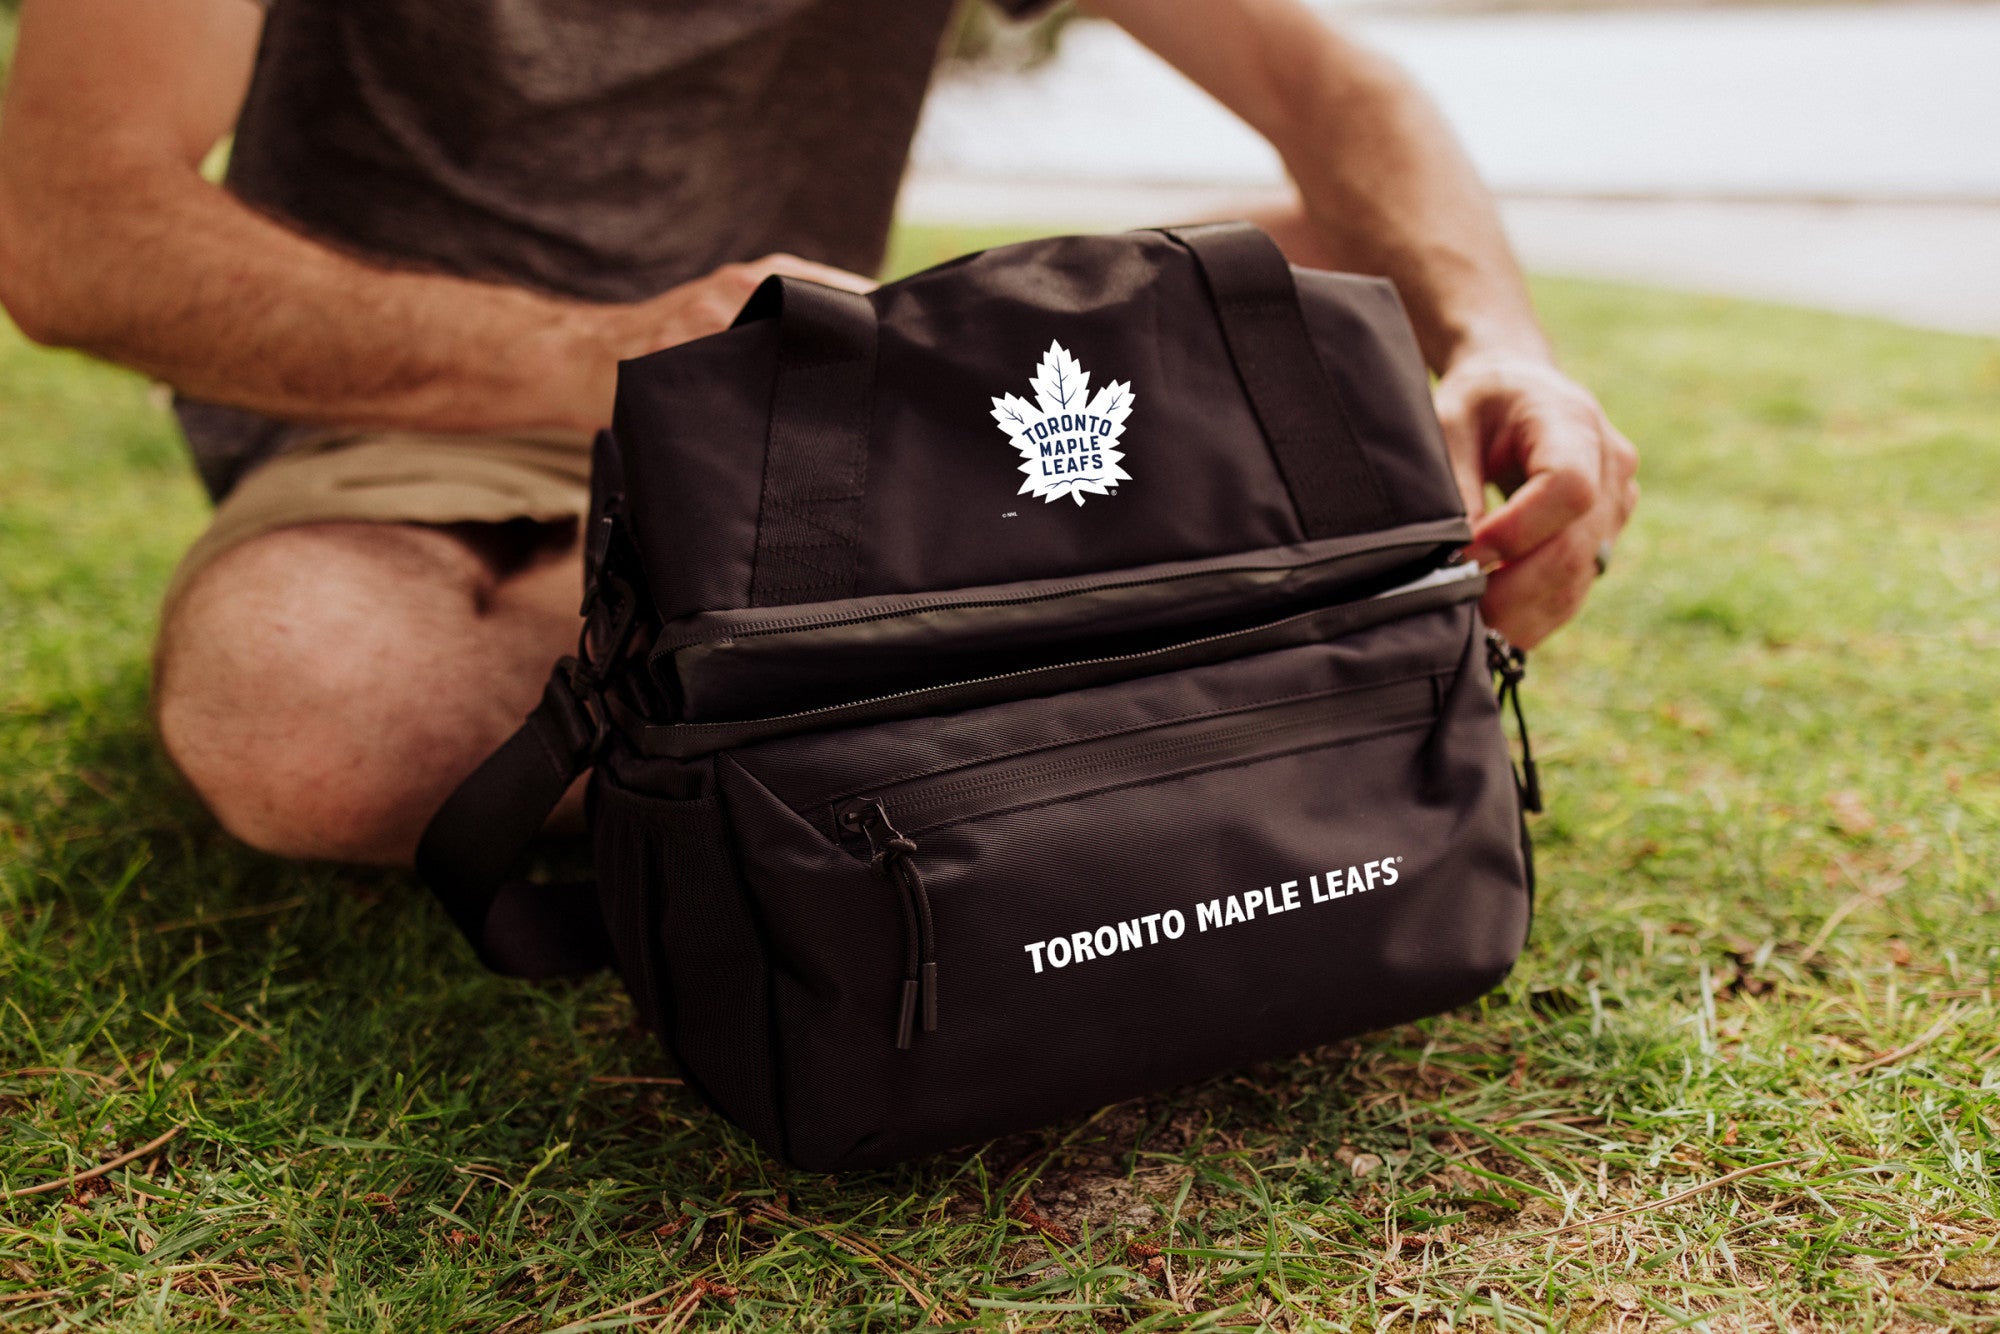 Toronto Maple Leafs - Tarana Lunch Bag Cooler with Utensils